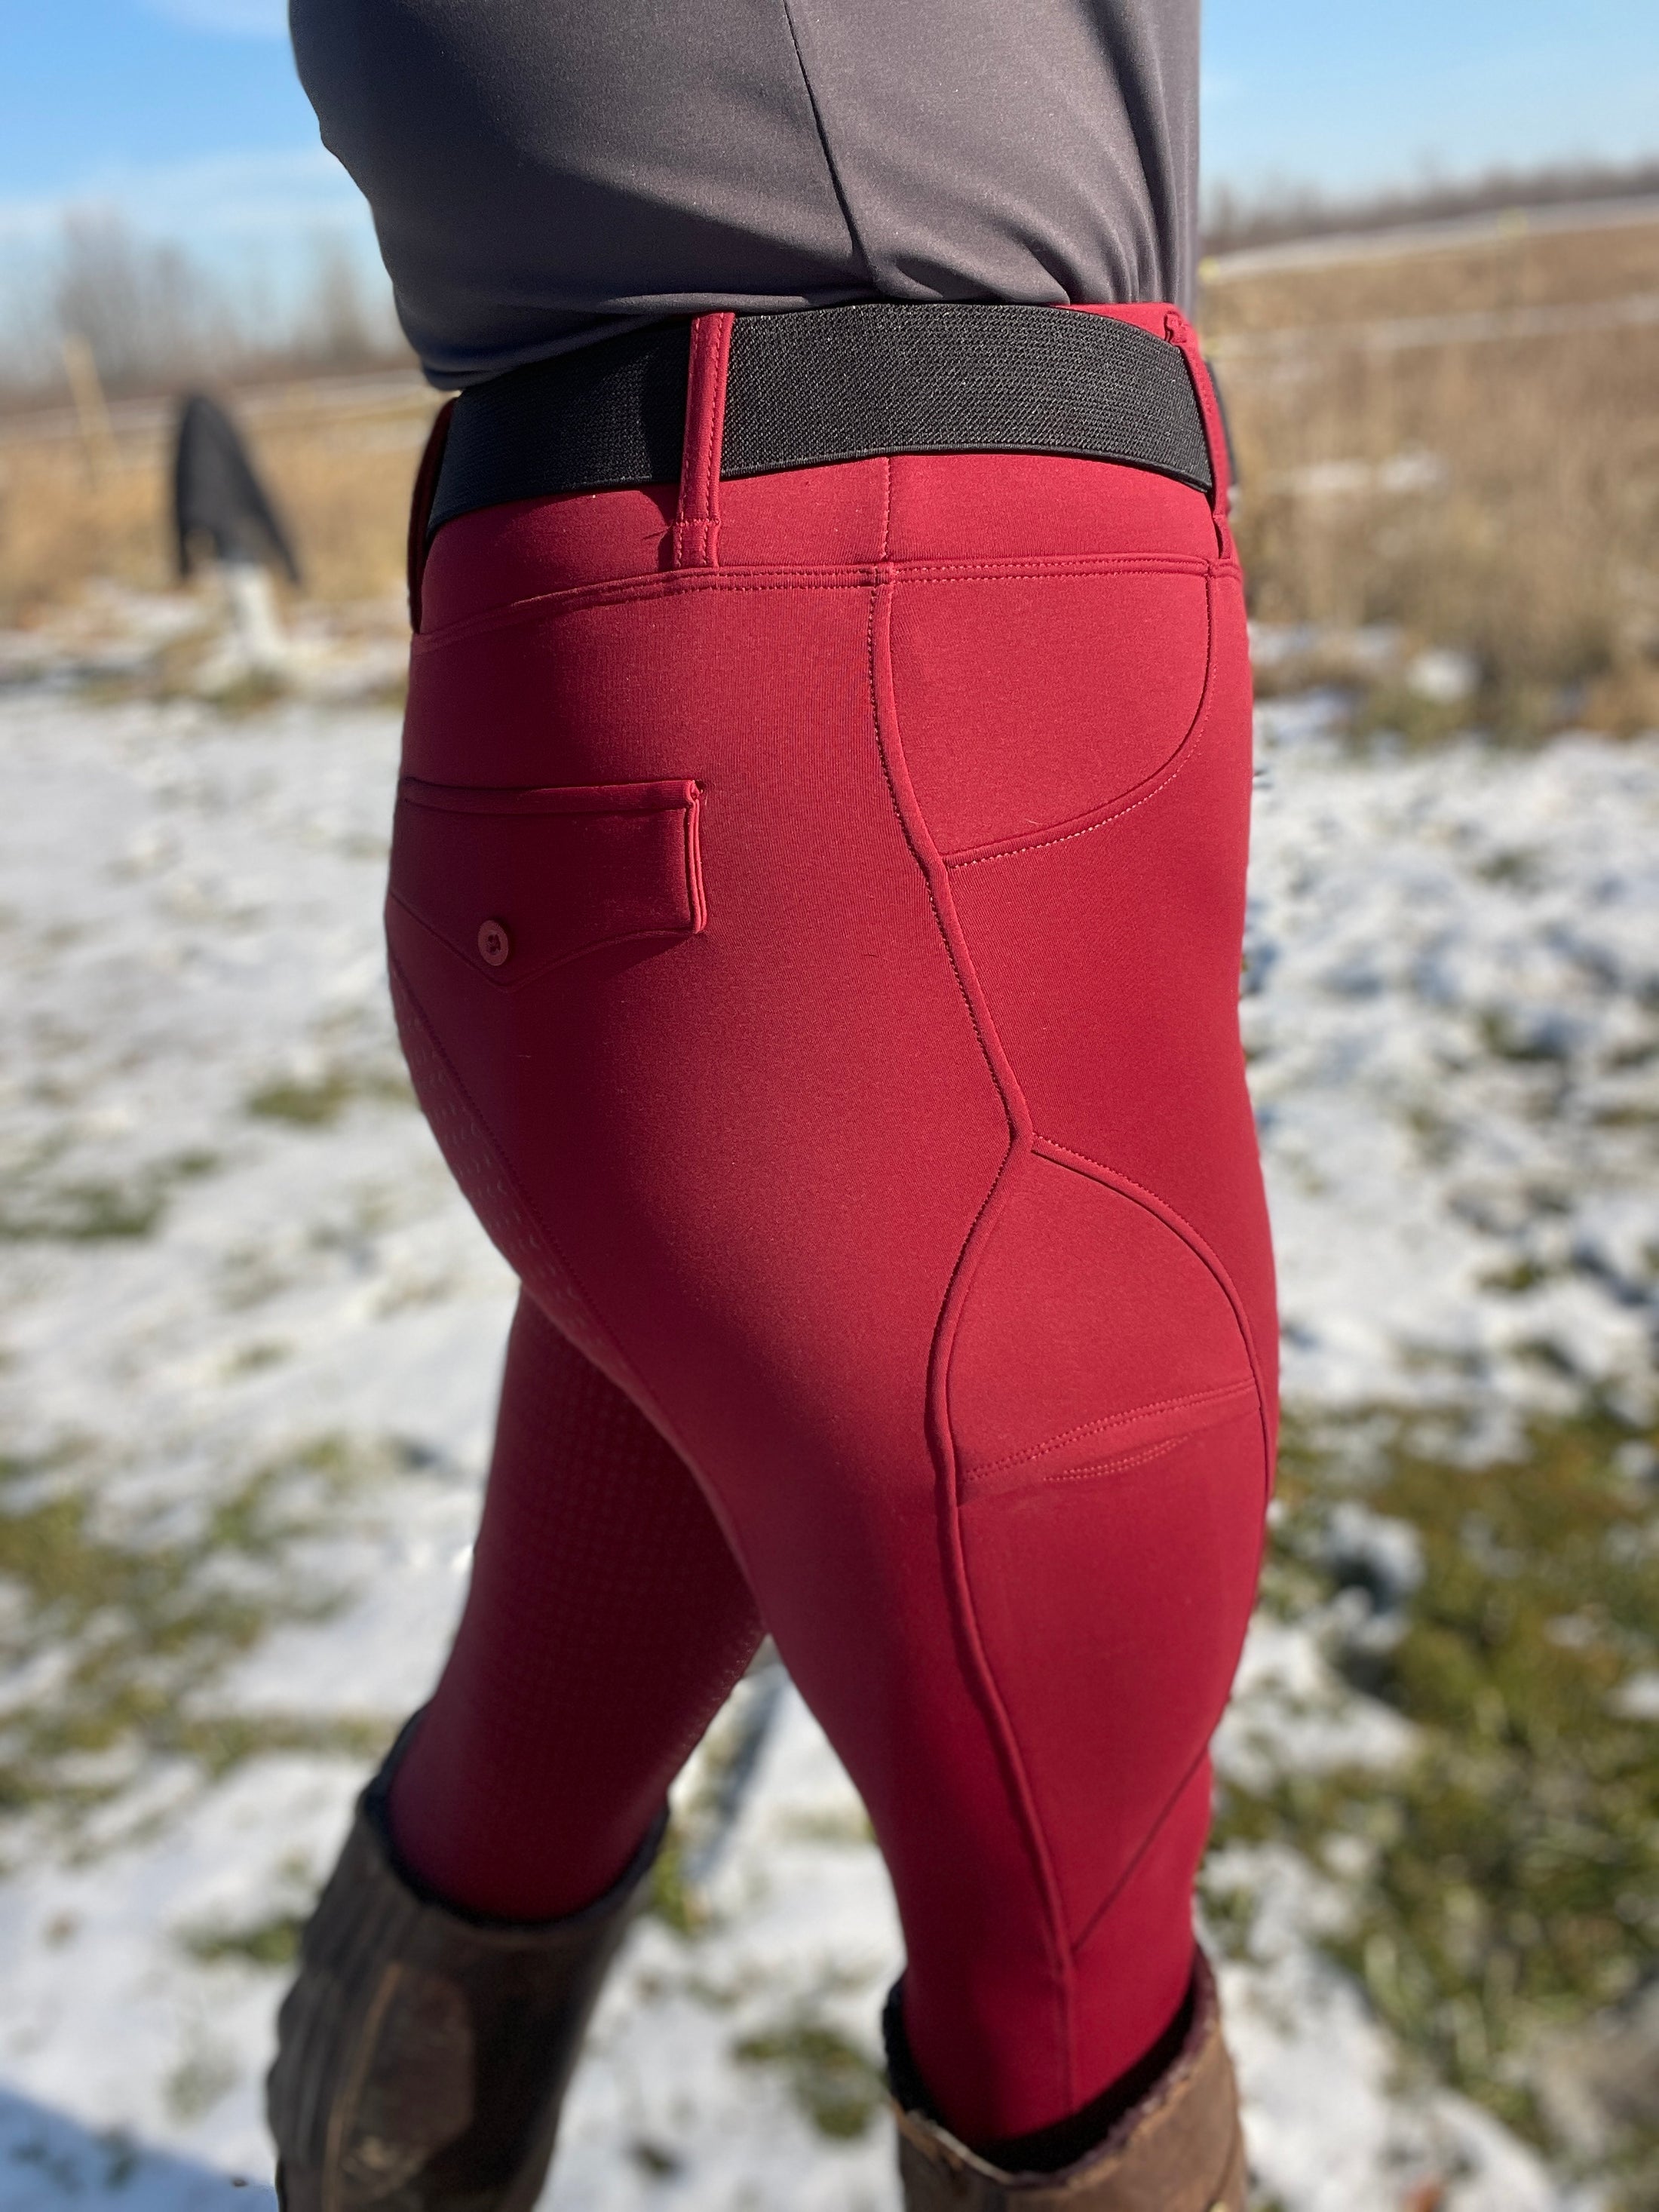 Felicity Warmth Breech - Double Lined, Full Seat in Cranberry